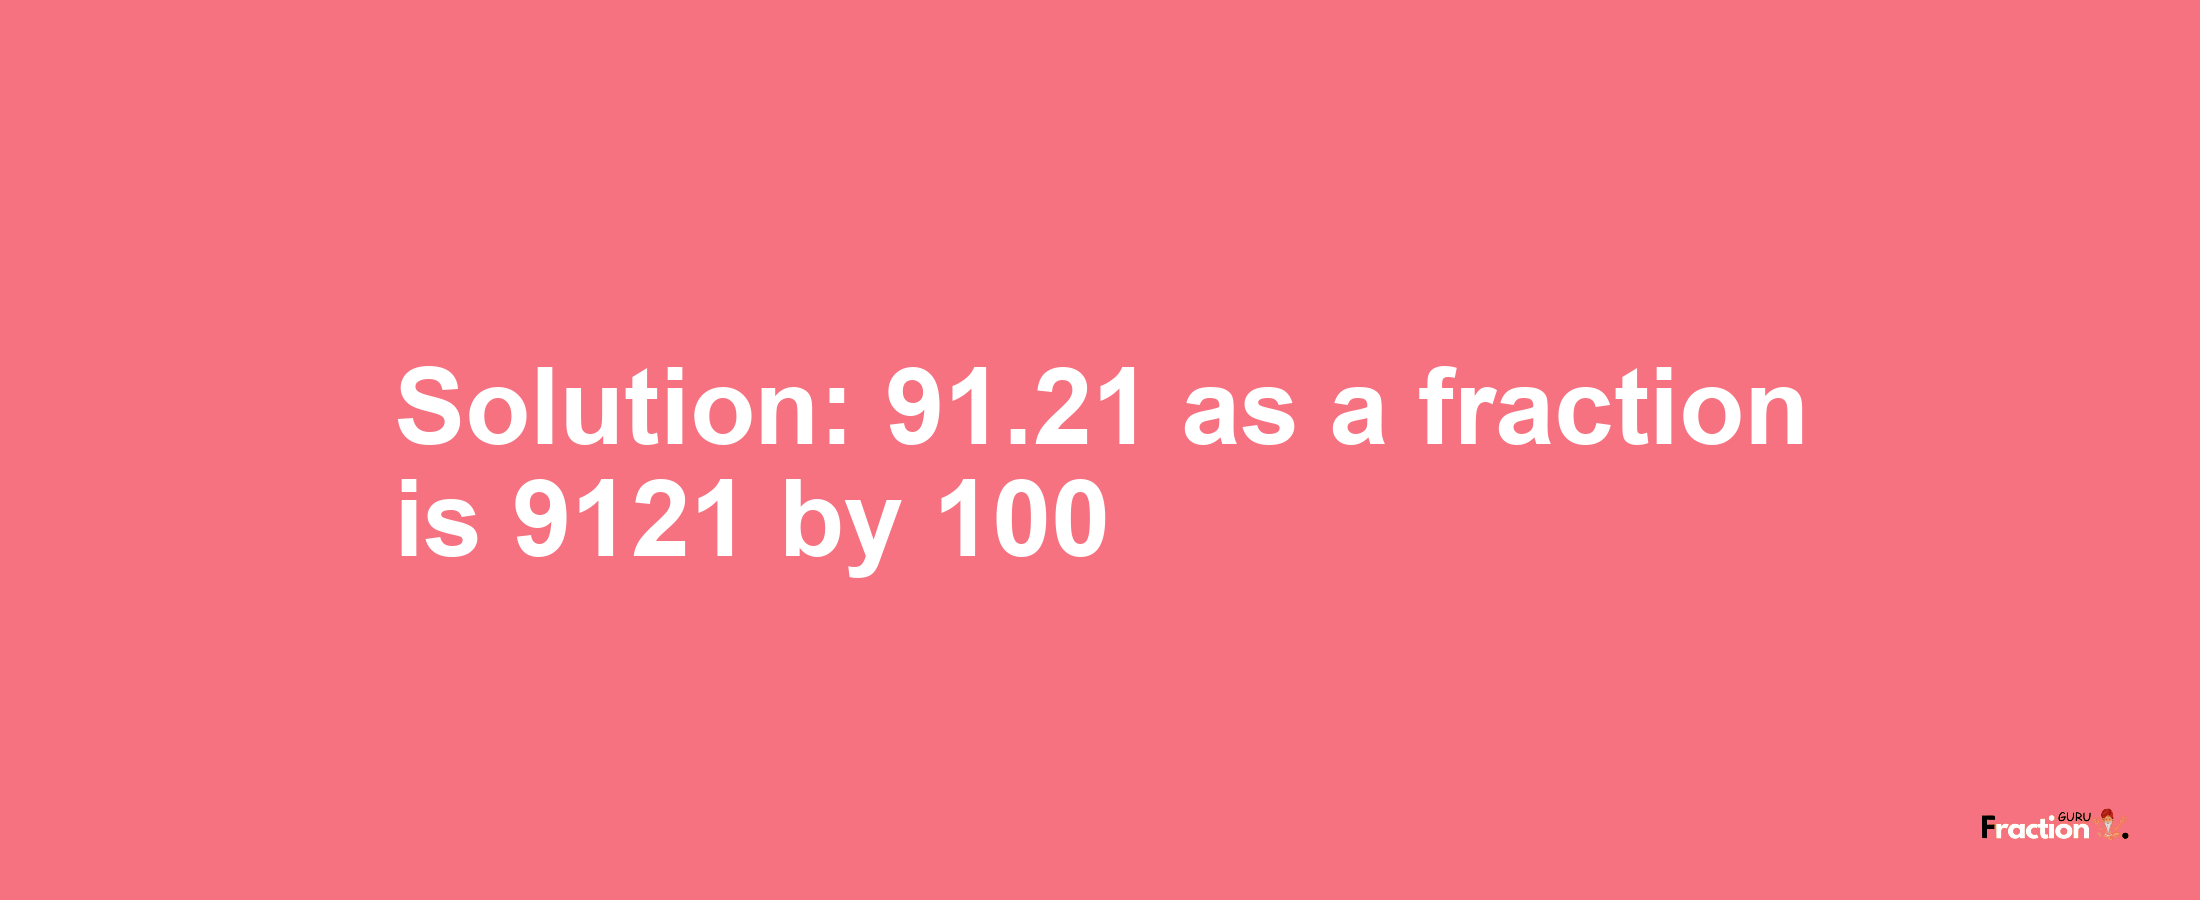 Solution:91.21 as a fraction is 9121/100